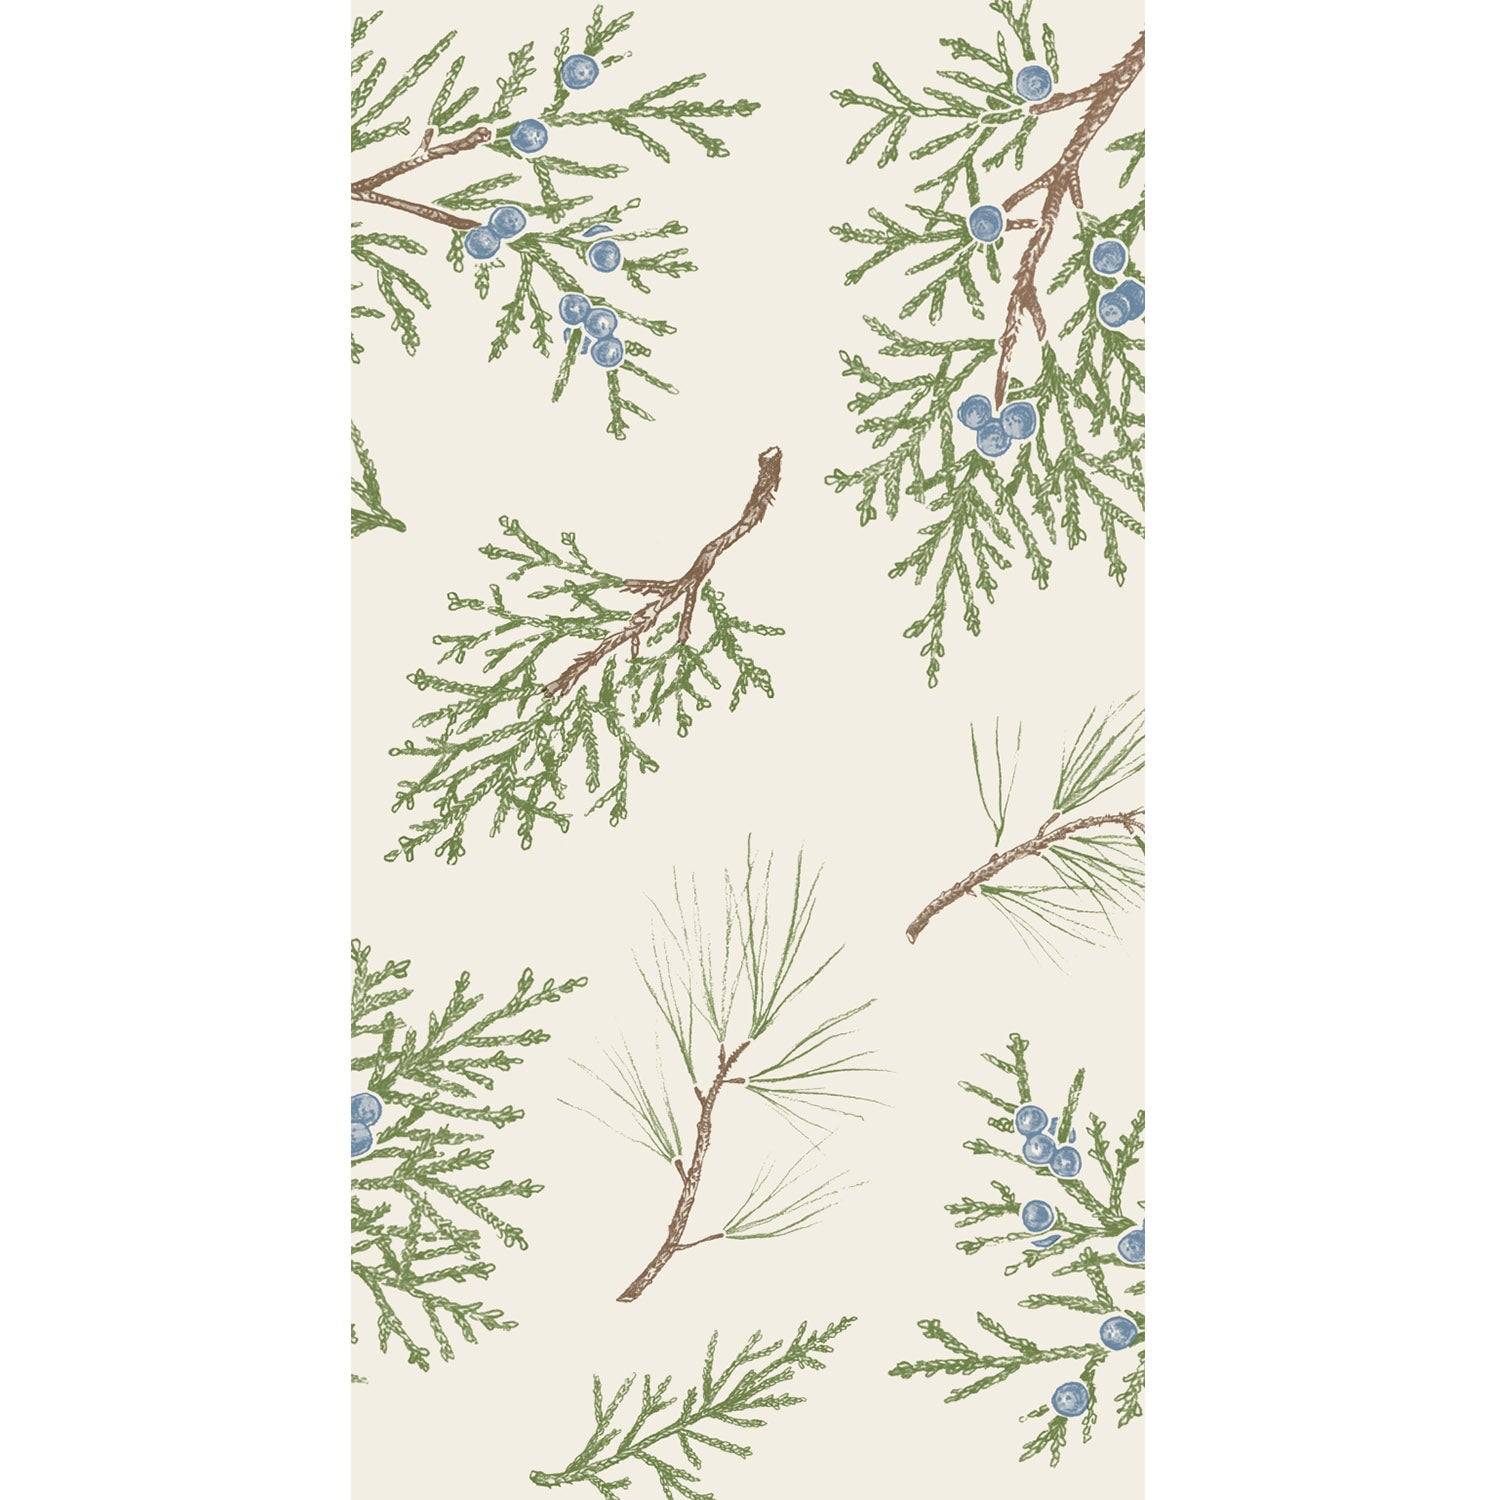 A rectangle guest napkin featuring an illustrated scatter of green and brown juniper and pine sprigs with small blue berries, over a white background.